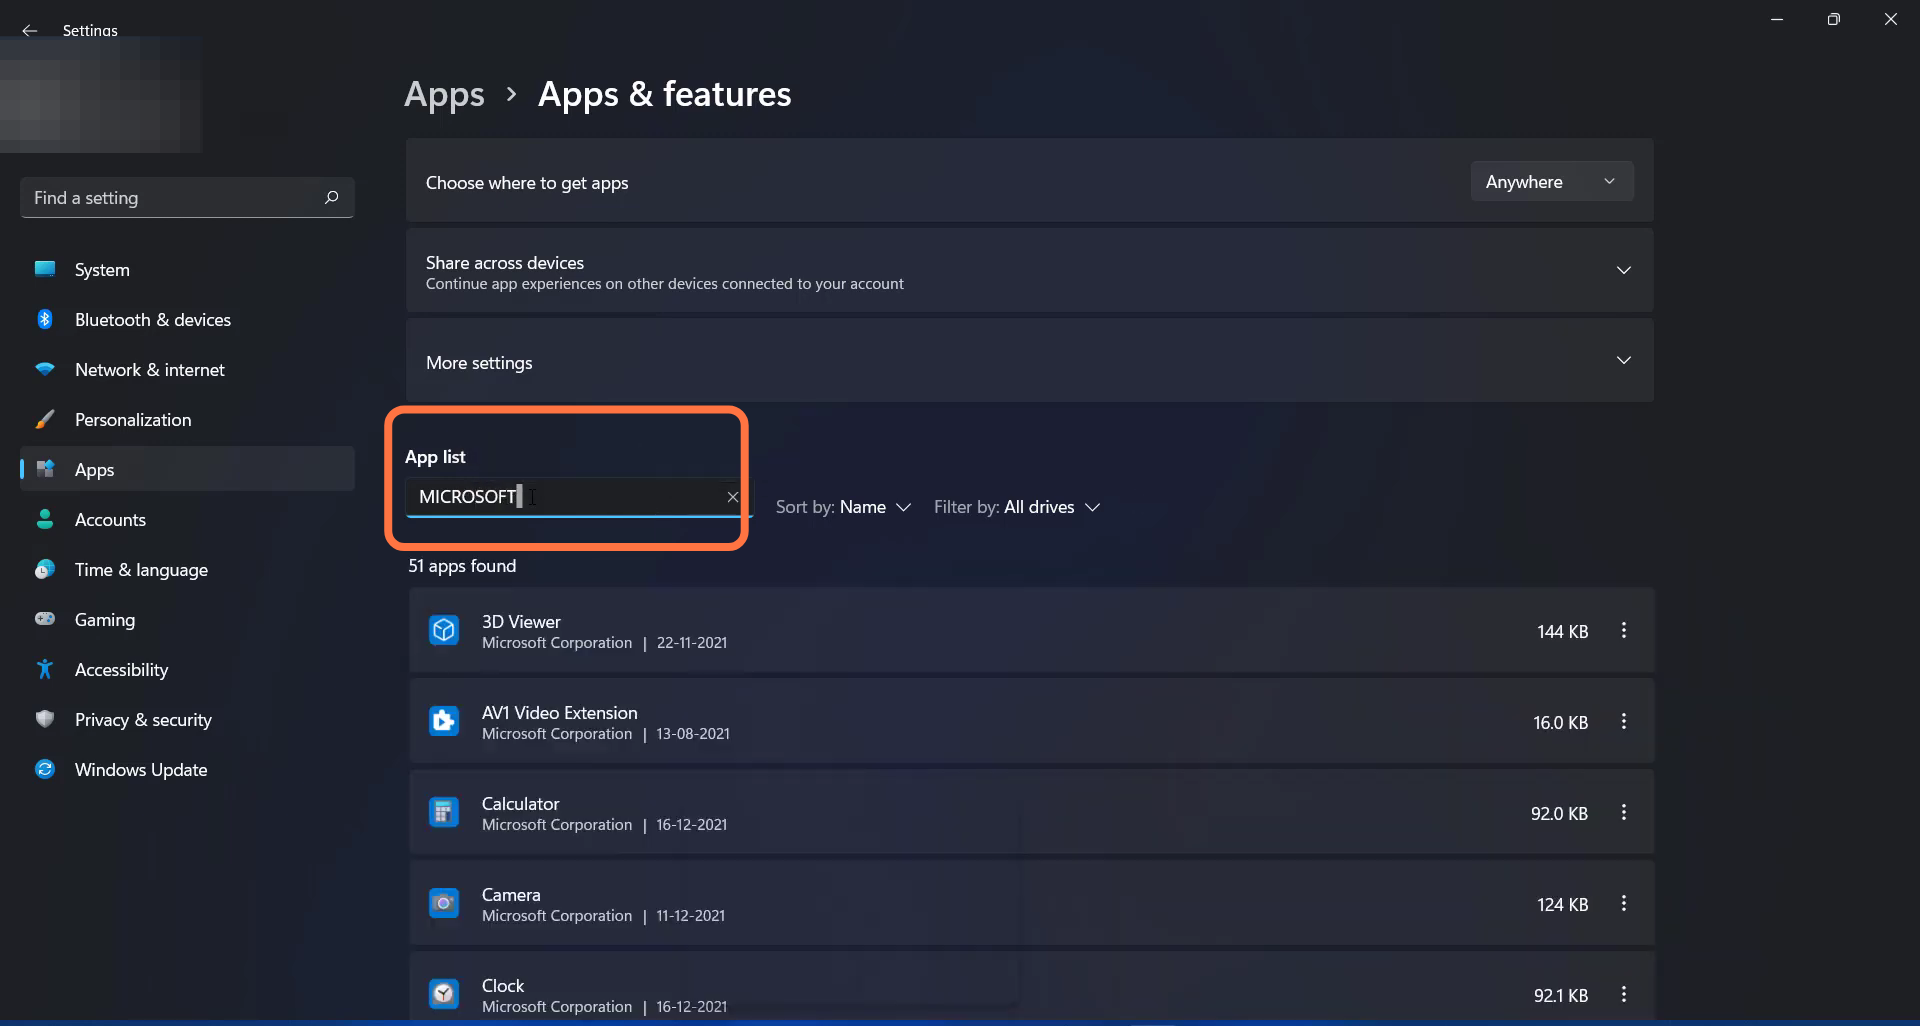 Enter into setting, go to Apps and search Microsoft store in the App list.